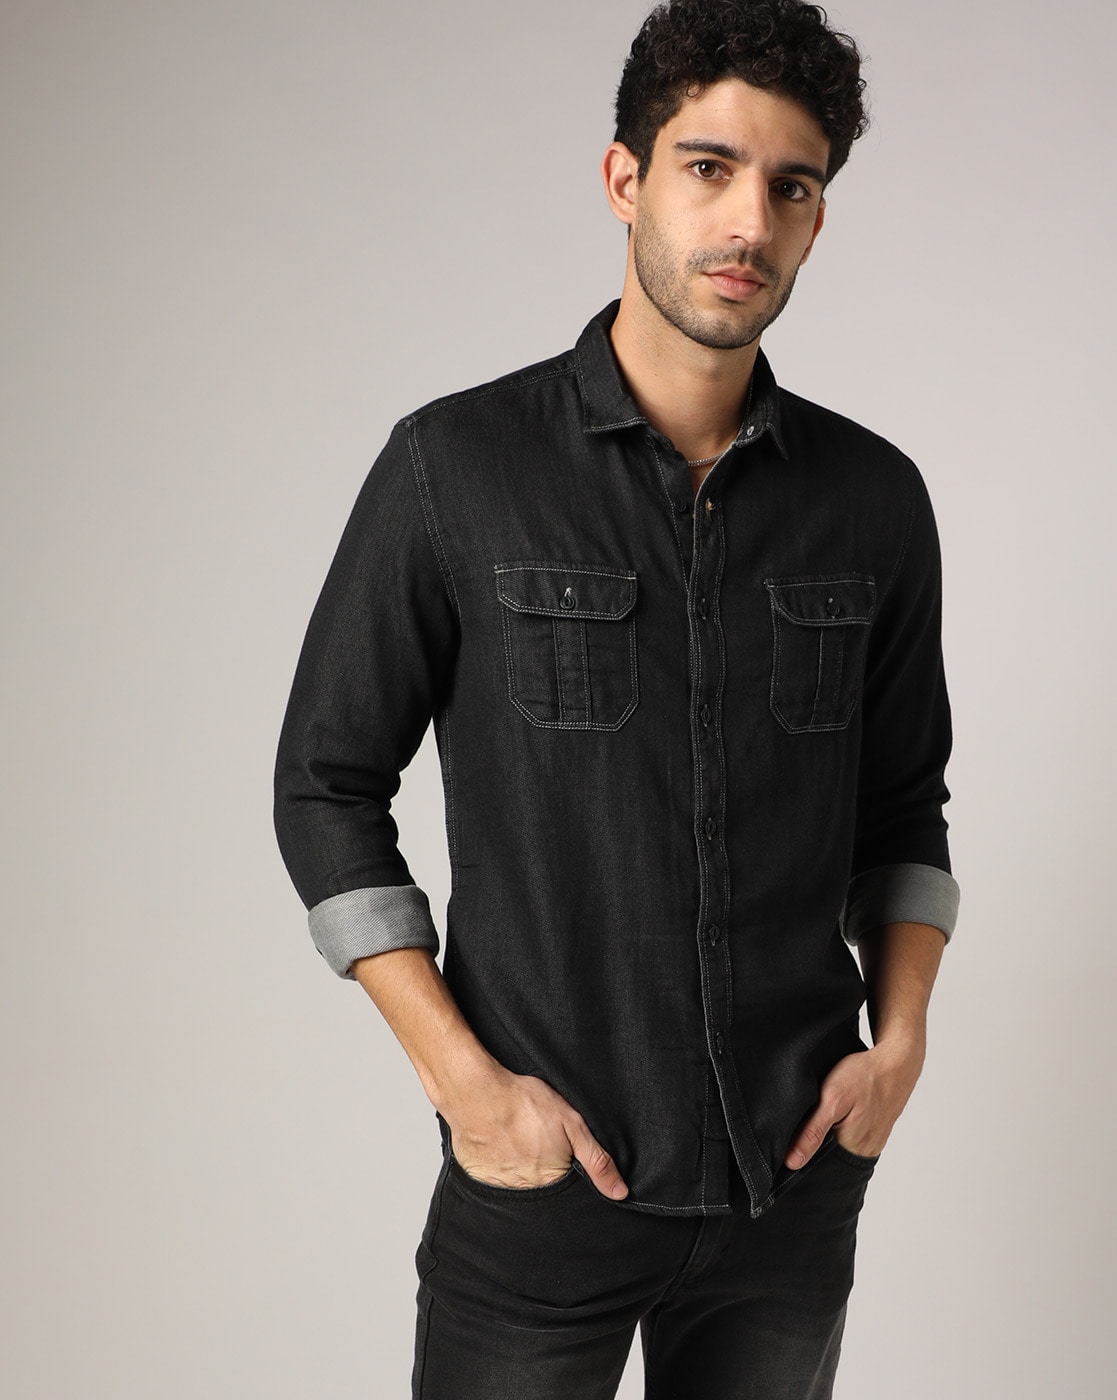 Blakely Clothing Shirts and Polo Shirts | Free UK Delivery Over £70